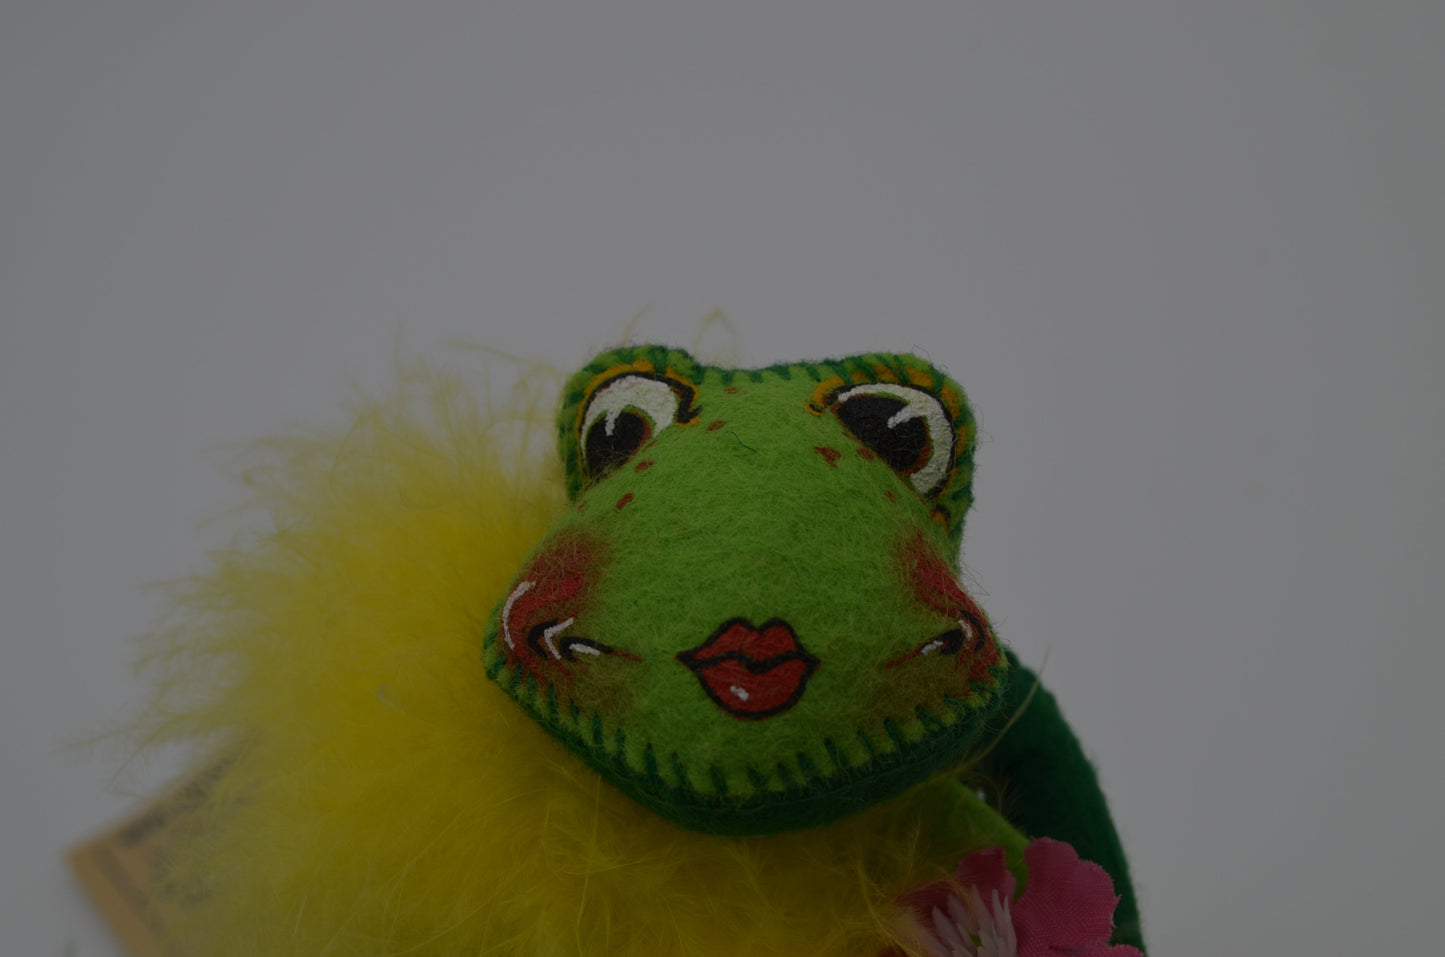 10" Floozy Frogs - Signed 970998 Annalee